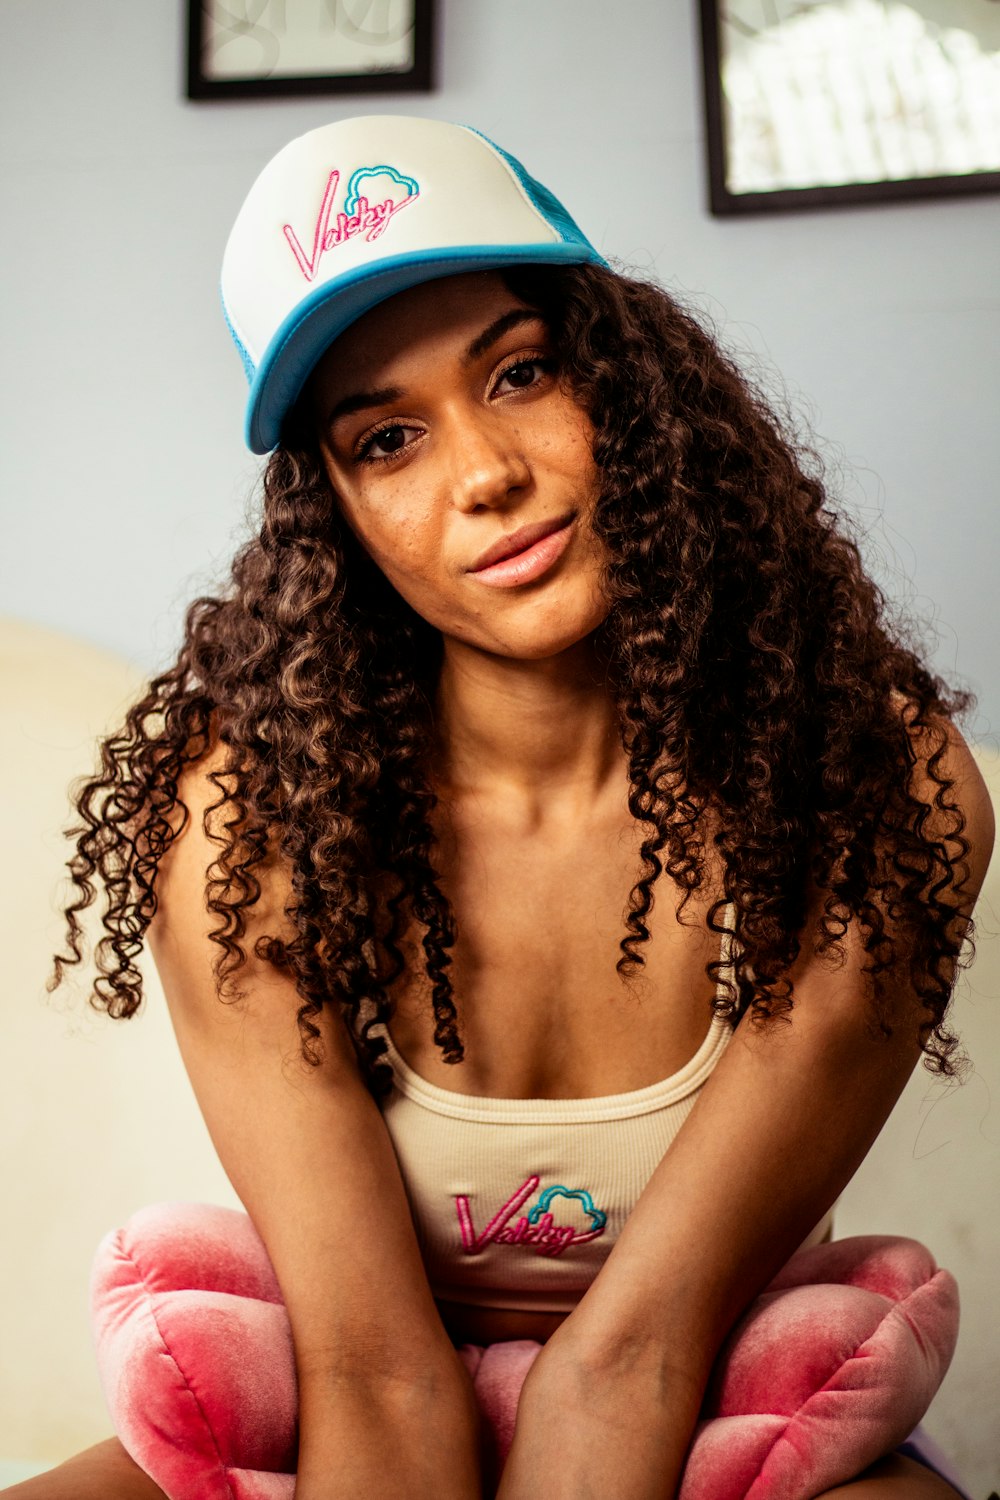 woman in white tank top wearing blue and white cap